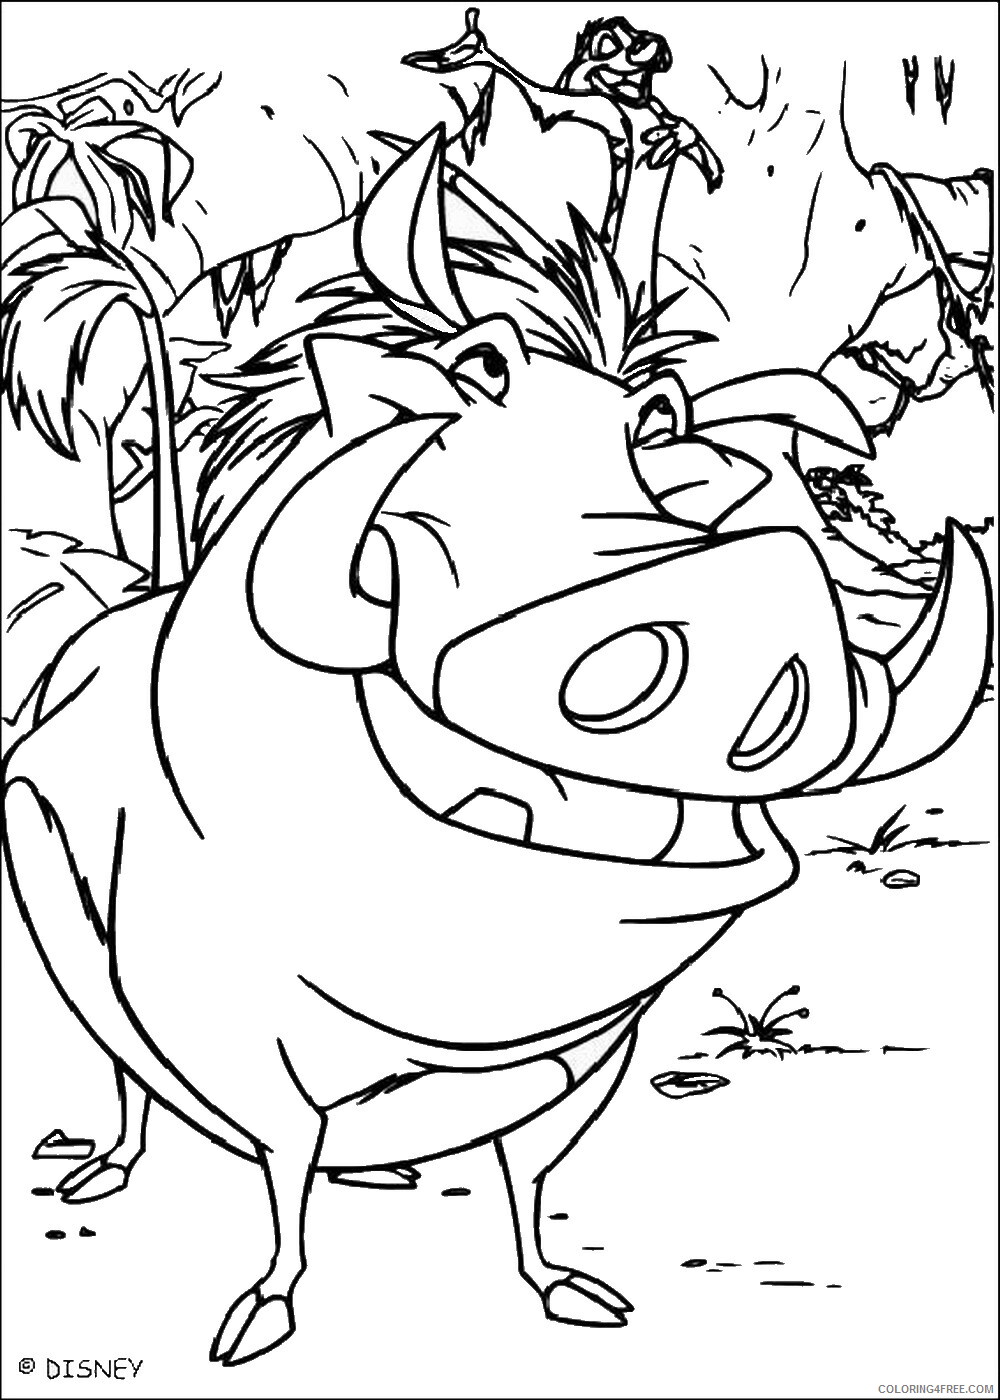 The Lion King Coloring Pages TV Film lionking_15 Printable 2020 09151 Coloring4free